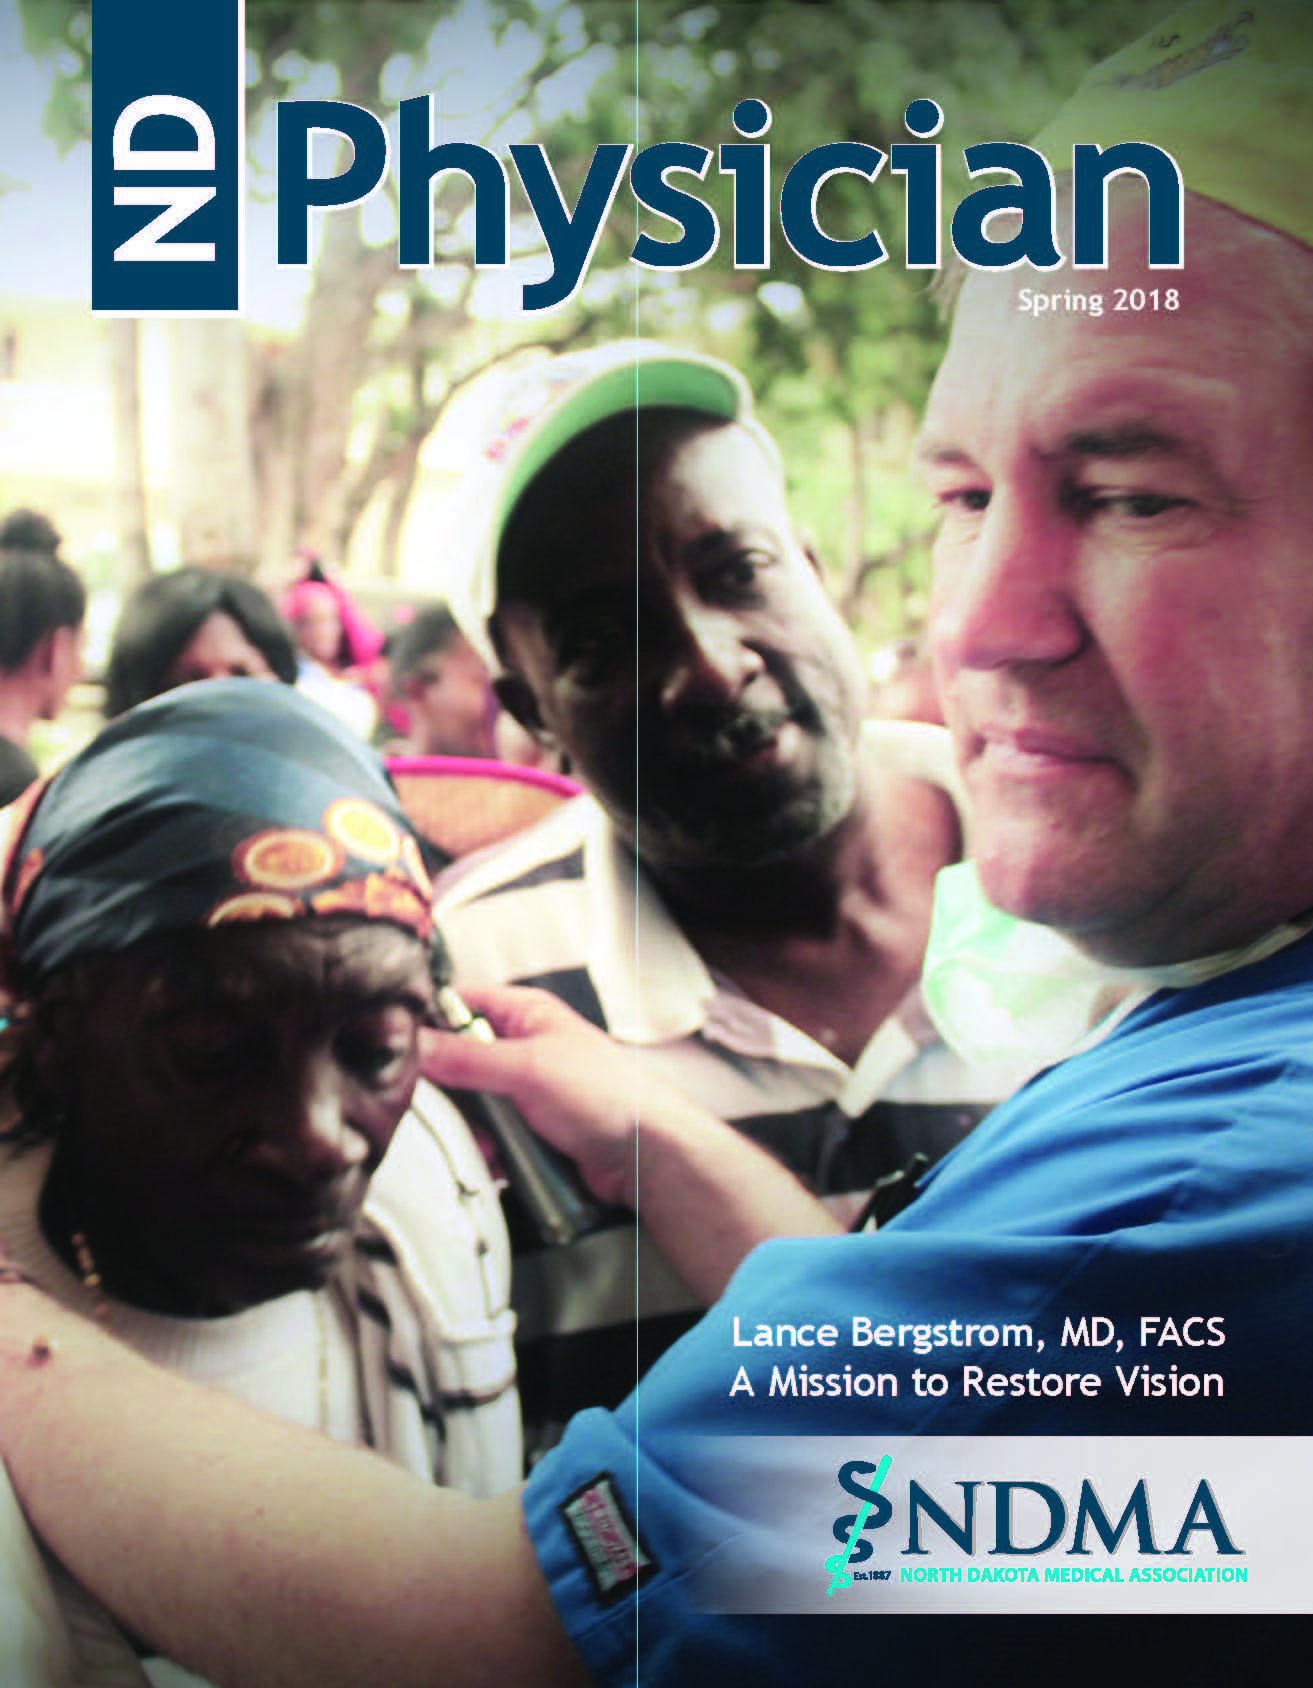 ND Physician Spring 2018 magazine cover